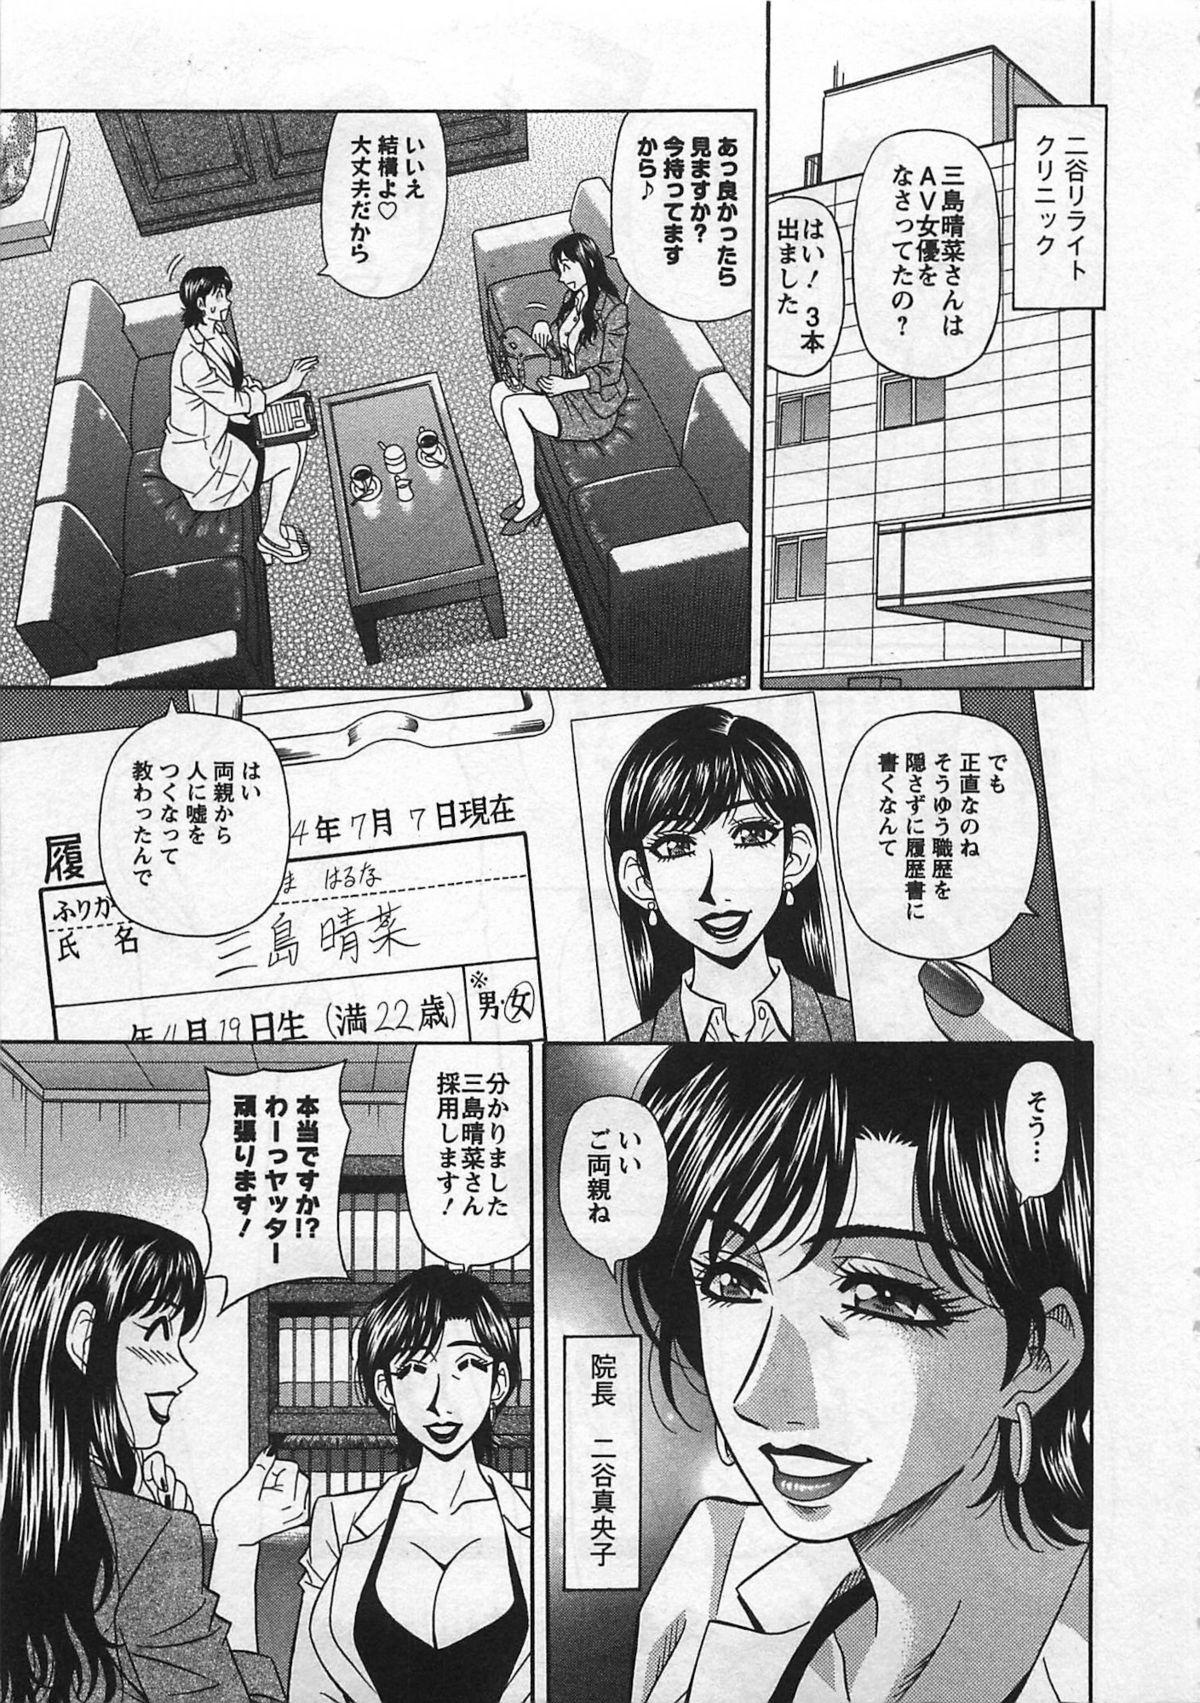 Pica Lucky + Clinic - Rewrite + Clinic 2 Shoes - Page 11